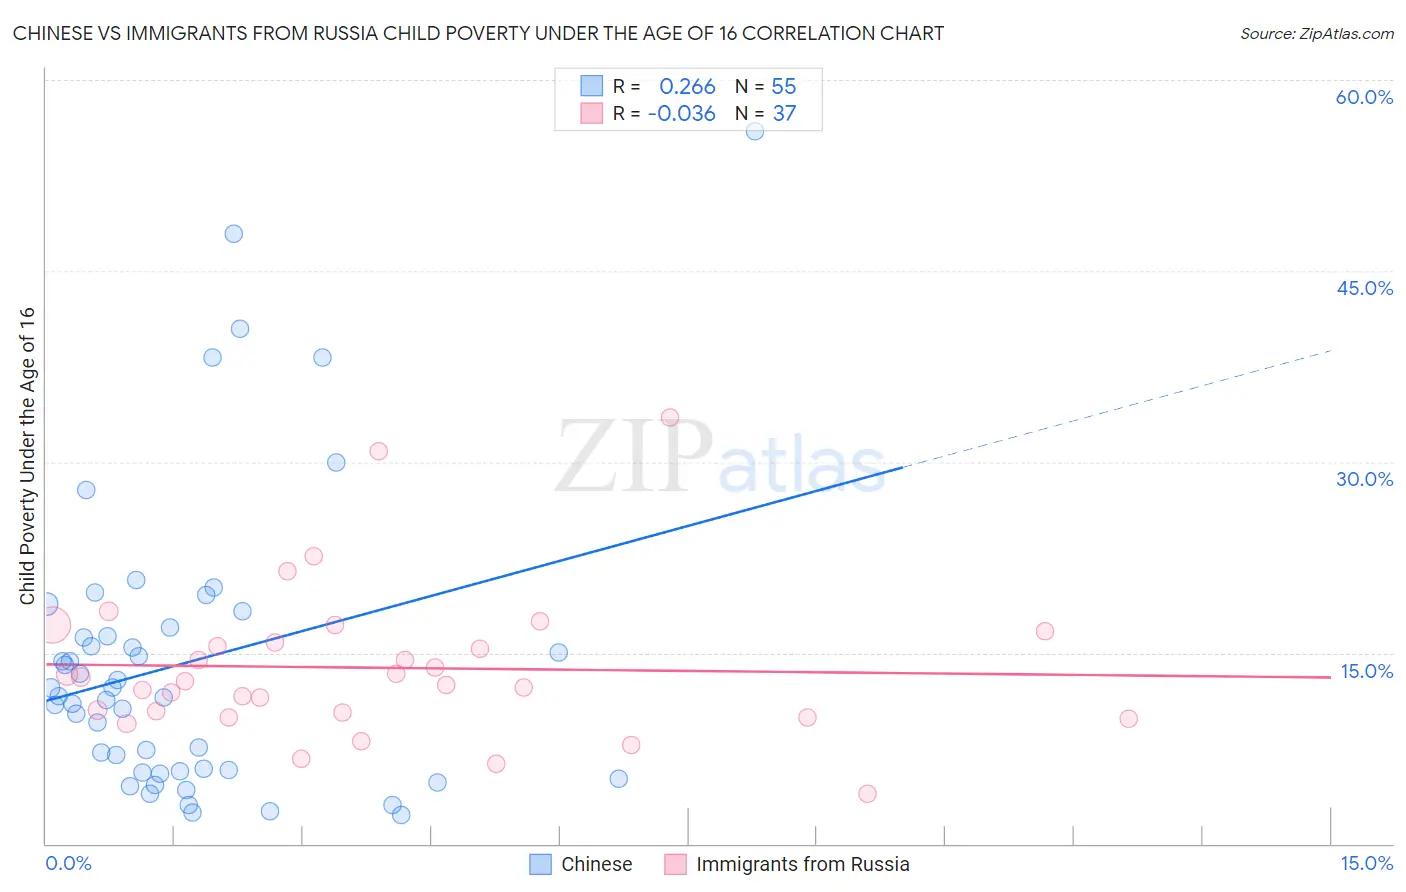 Chinese vs Immigrants from Russia Child Poverty Under the Age of 16